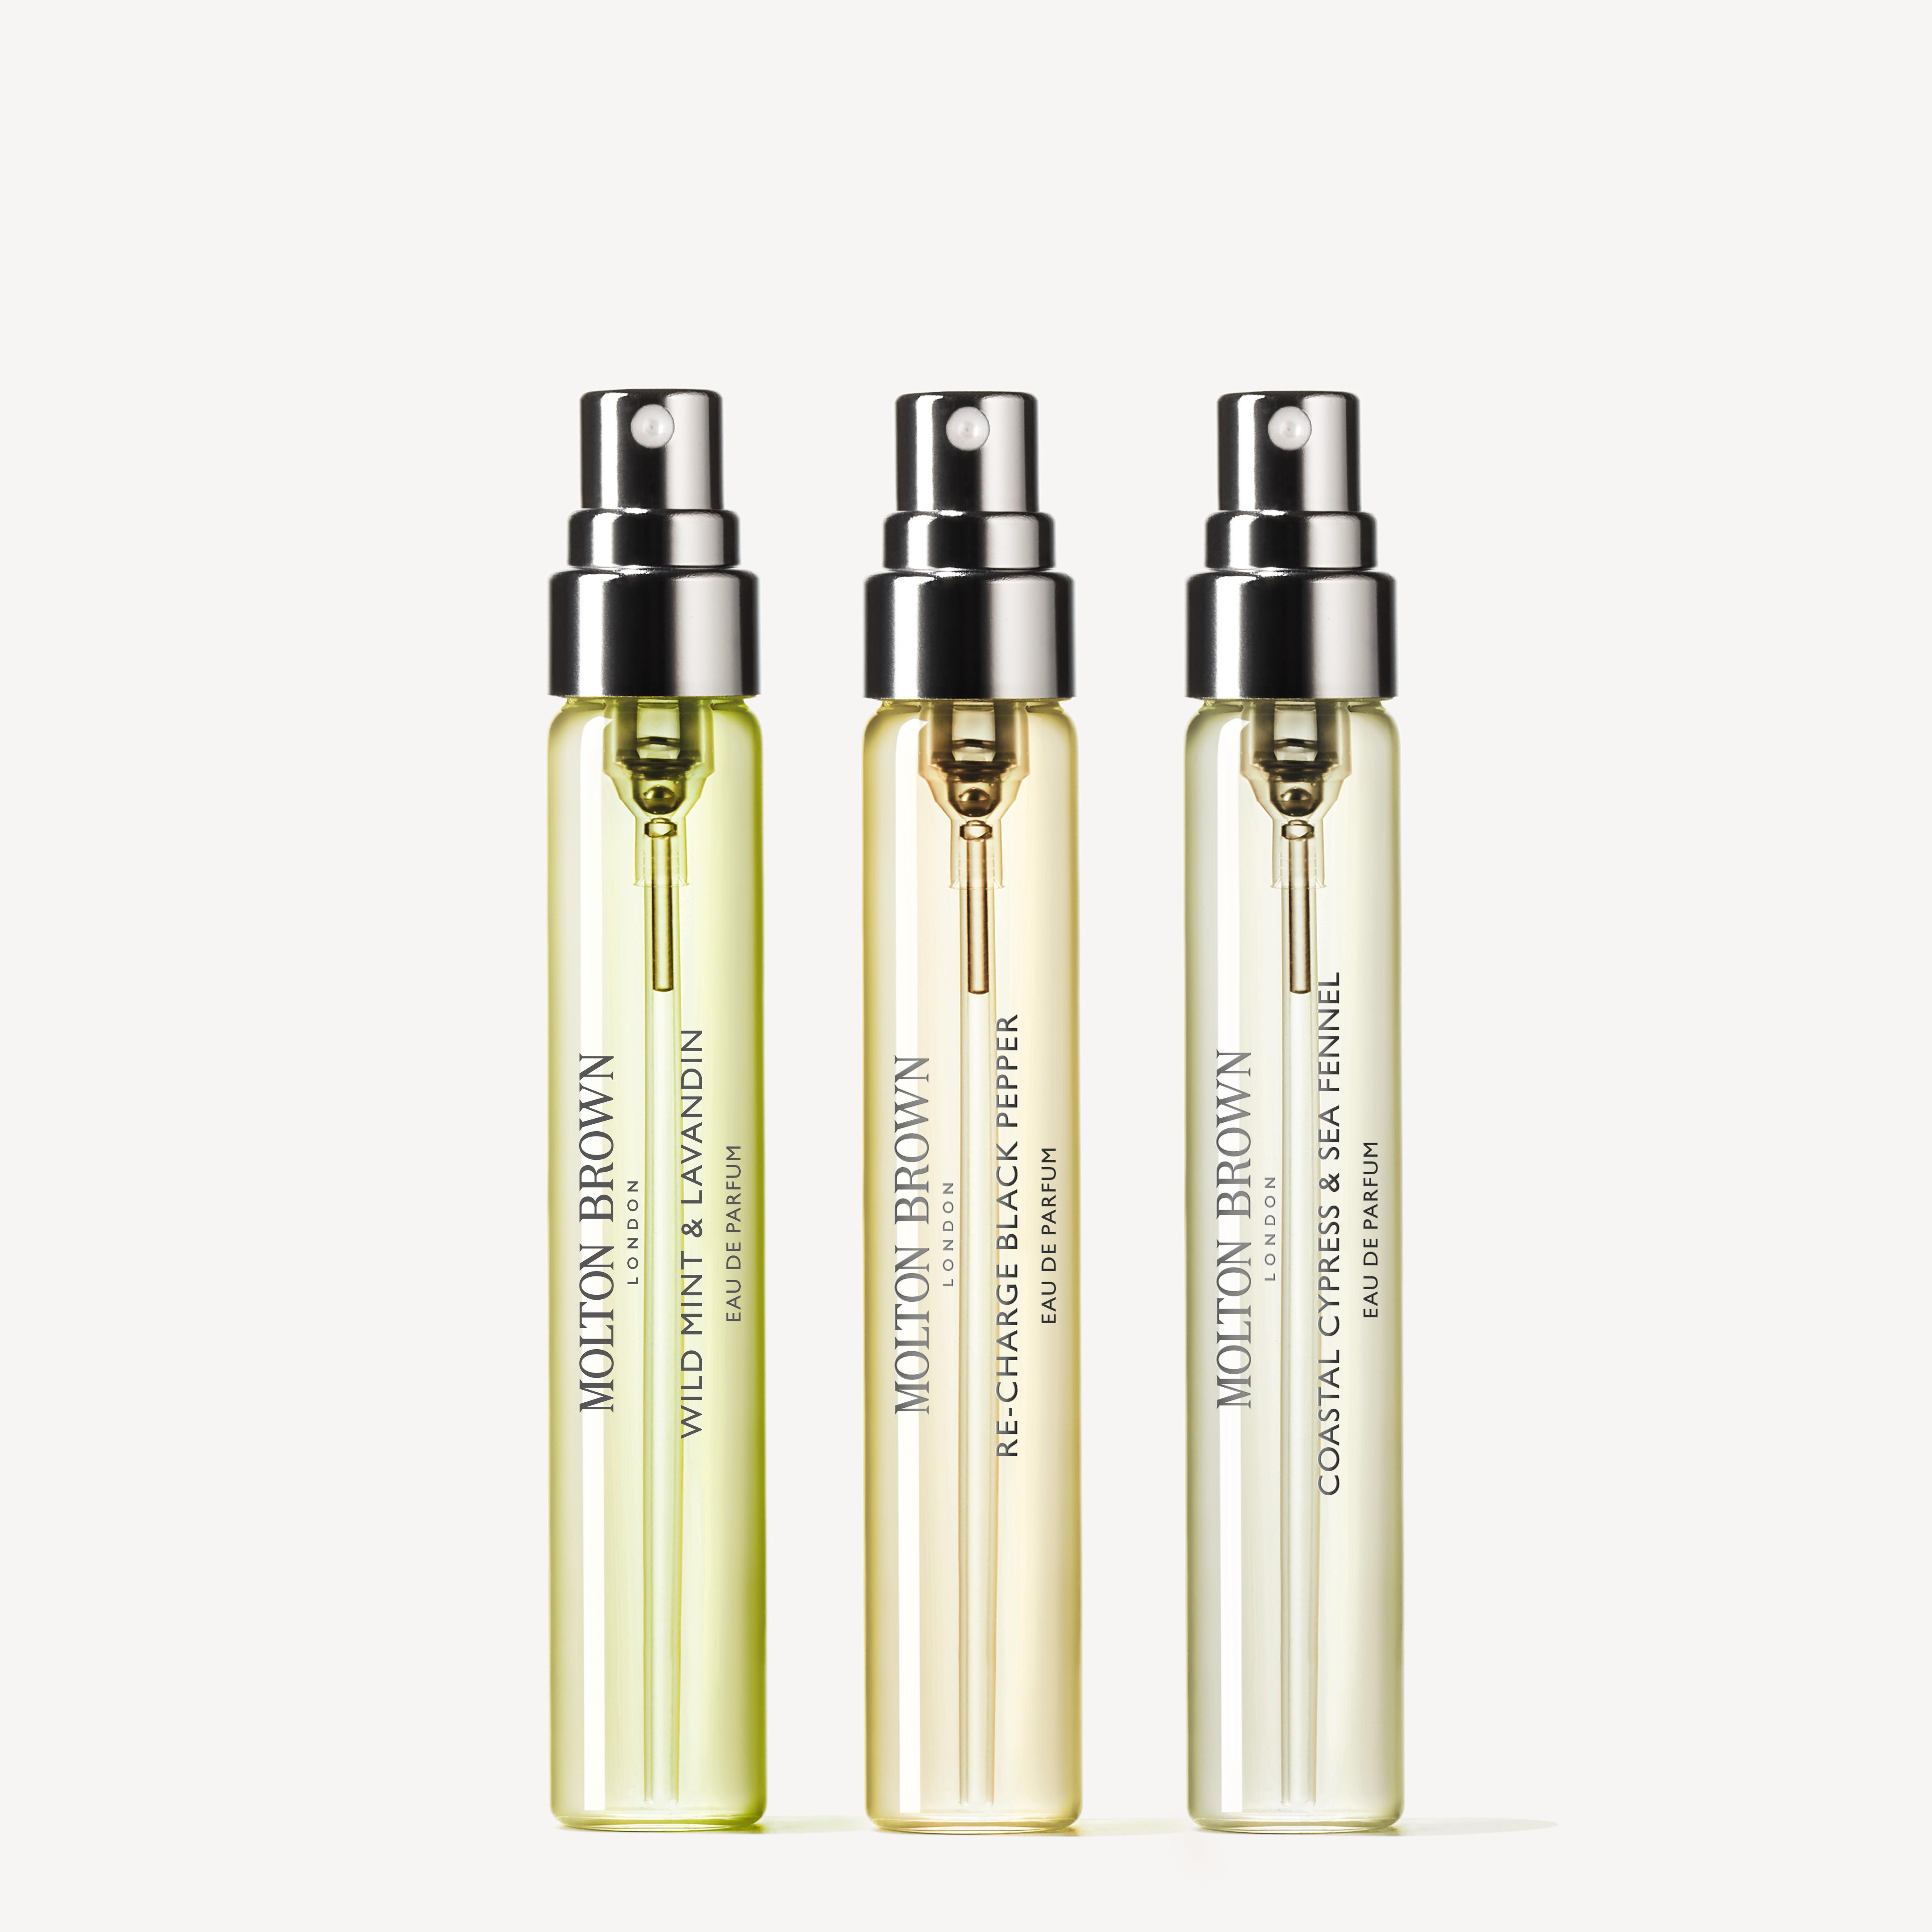 Molton Brown Aromatic & Citrus Fragrance Discovery Set